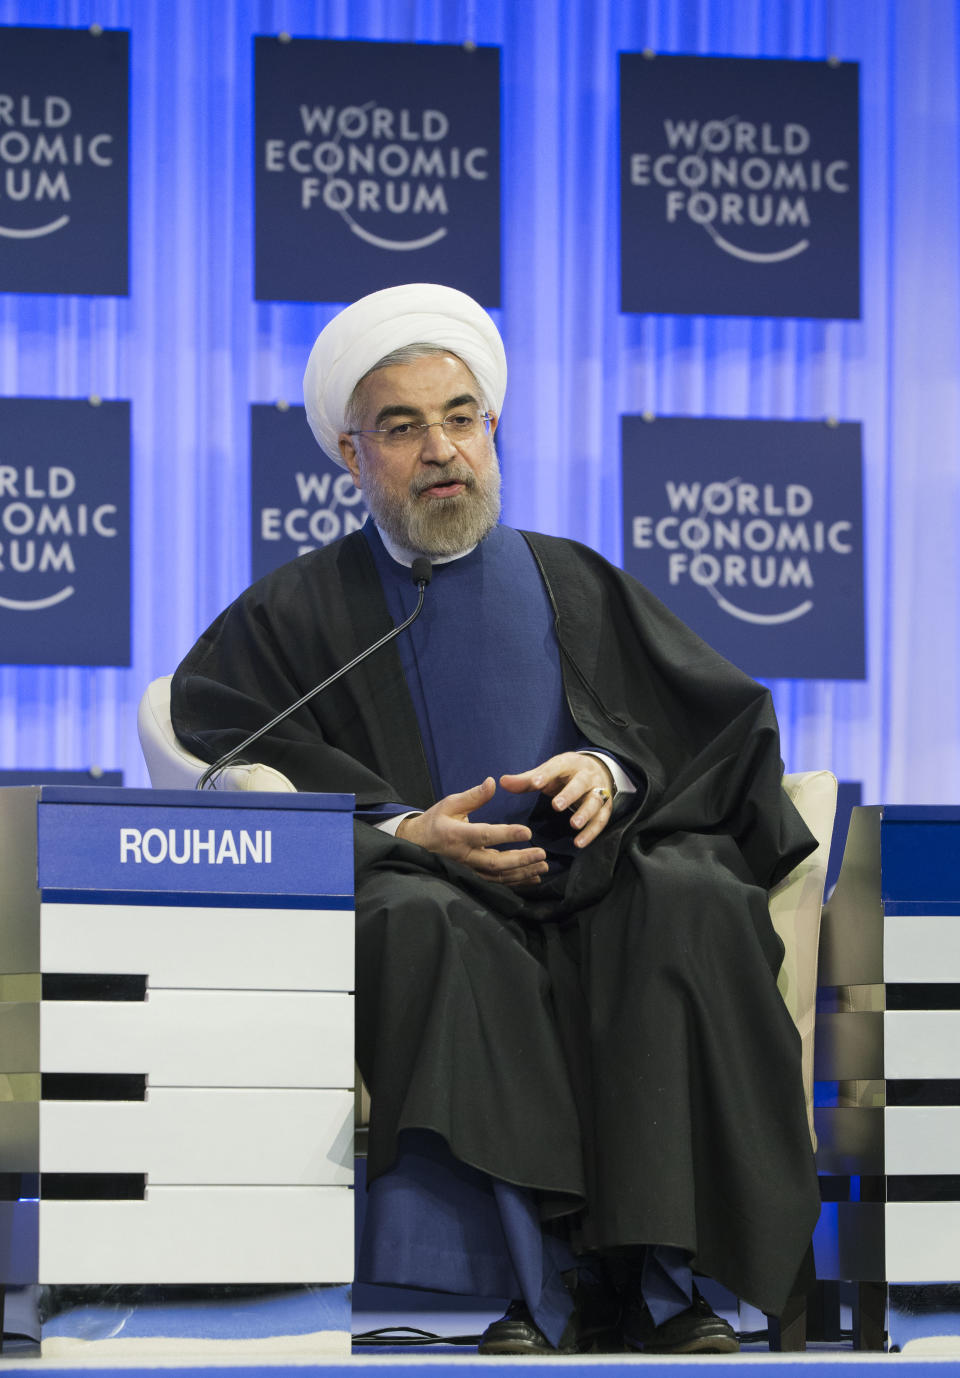 Iranian President Hassan Rouhani, gestures as speaks during a session of the World Economic Forum in Davos, Switzerland, Thursday, Jan. 23, 2014. Leaders gathered in the Swiss ski resort of Davos have made it a top priority to push to reshape the global economy and cut global warming by shifting to cleaner energy sources. (AP Photo/Michel Euler)